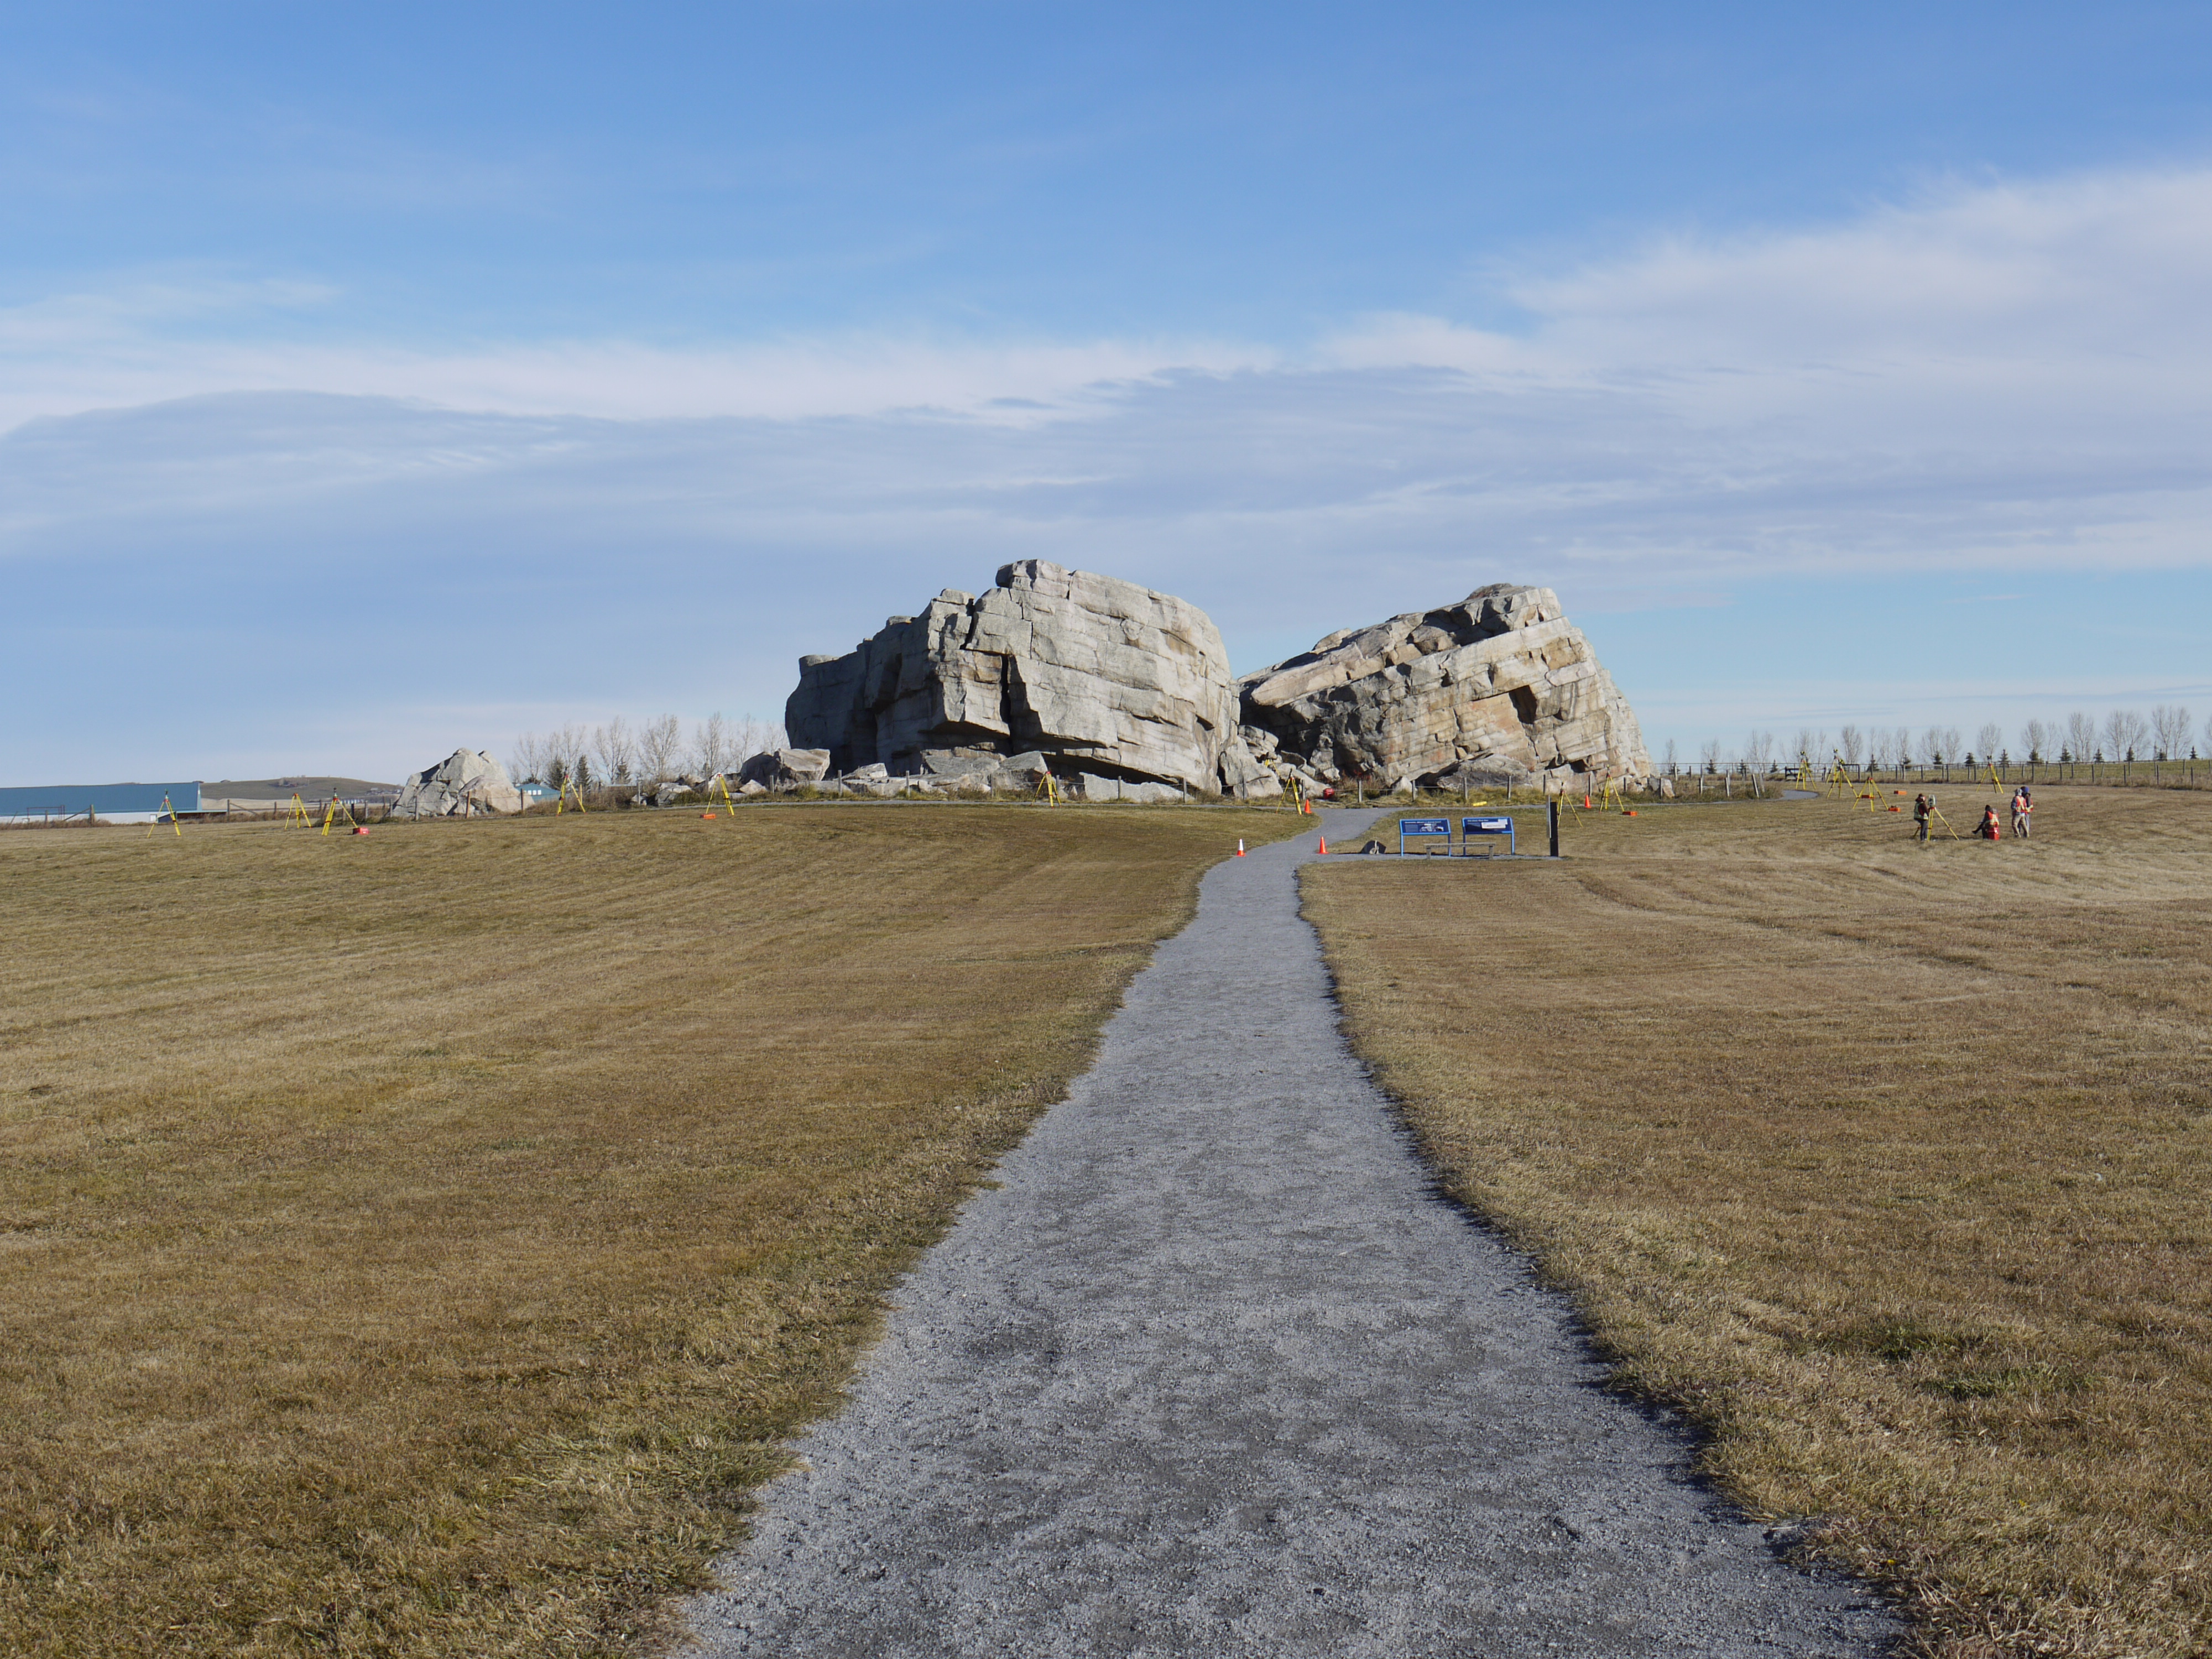 Overview of Okotoks Erratic with control network in place for laser scanning by geomatic engineering students from the University of Calgary, October 2016.